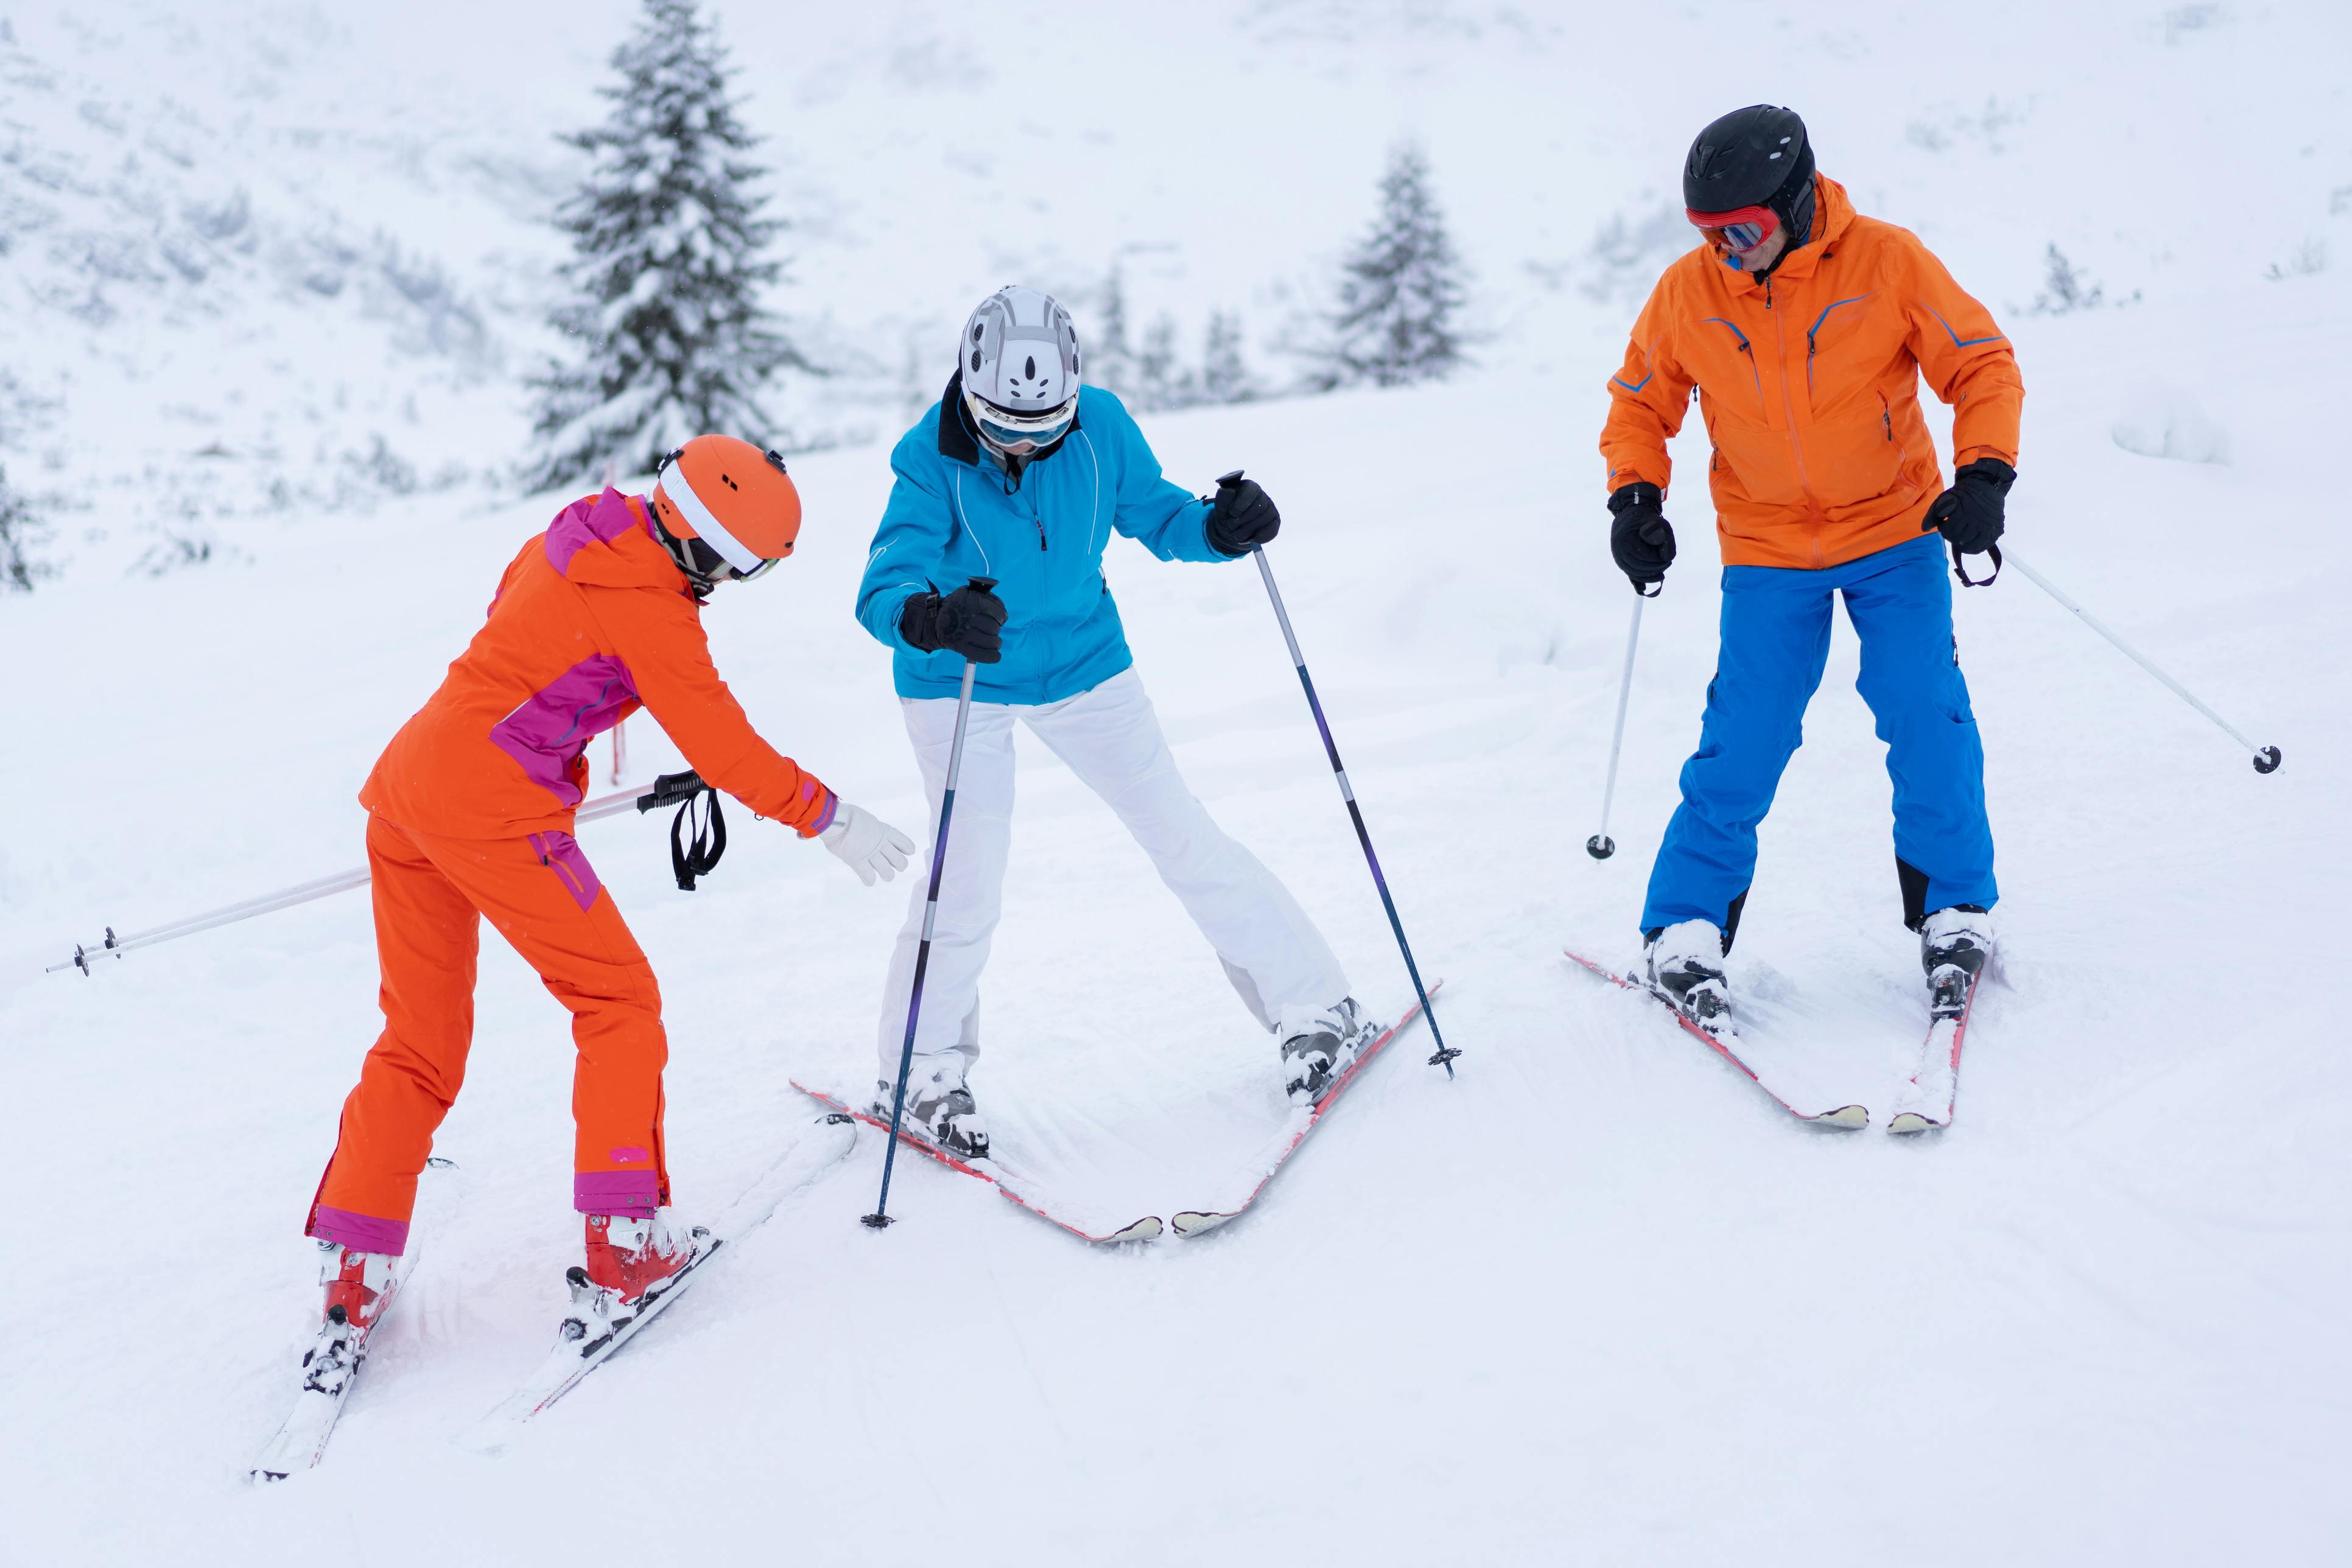 A woman instructs another woman how to position her skis while a man looks on